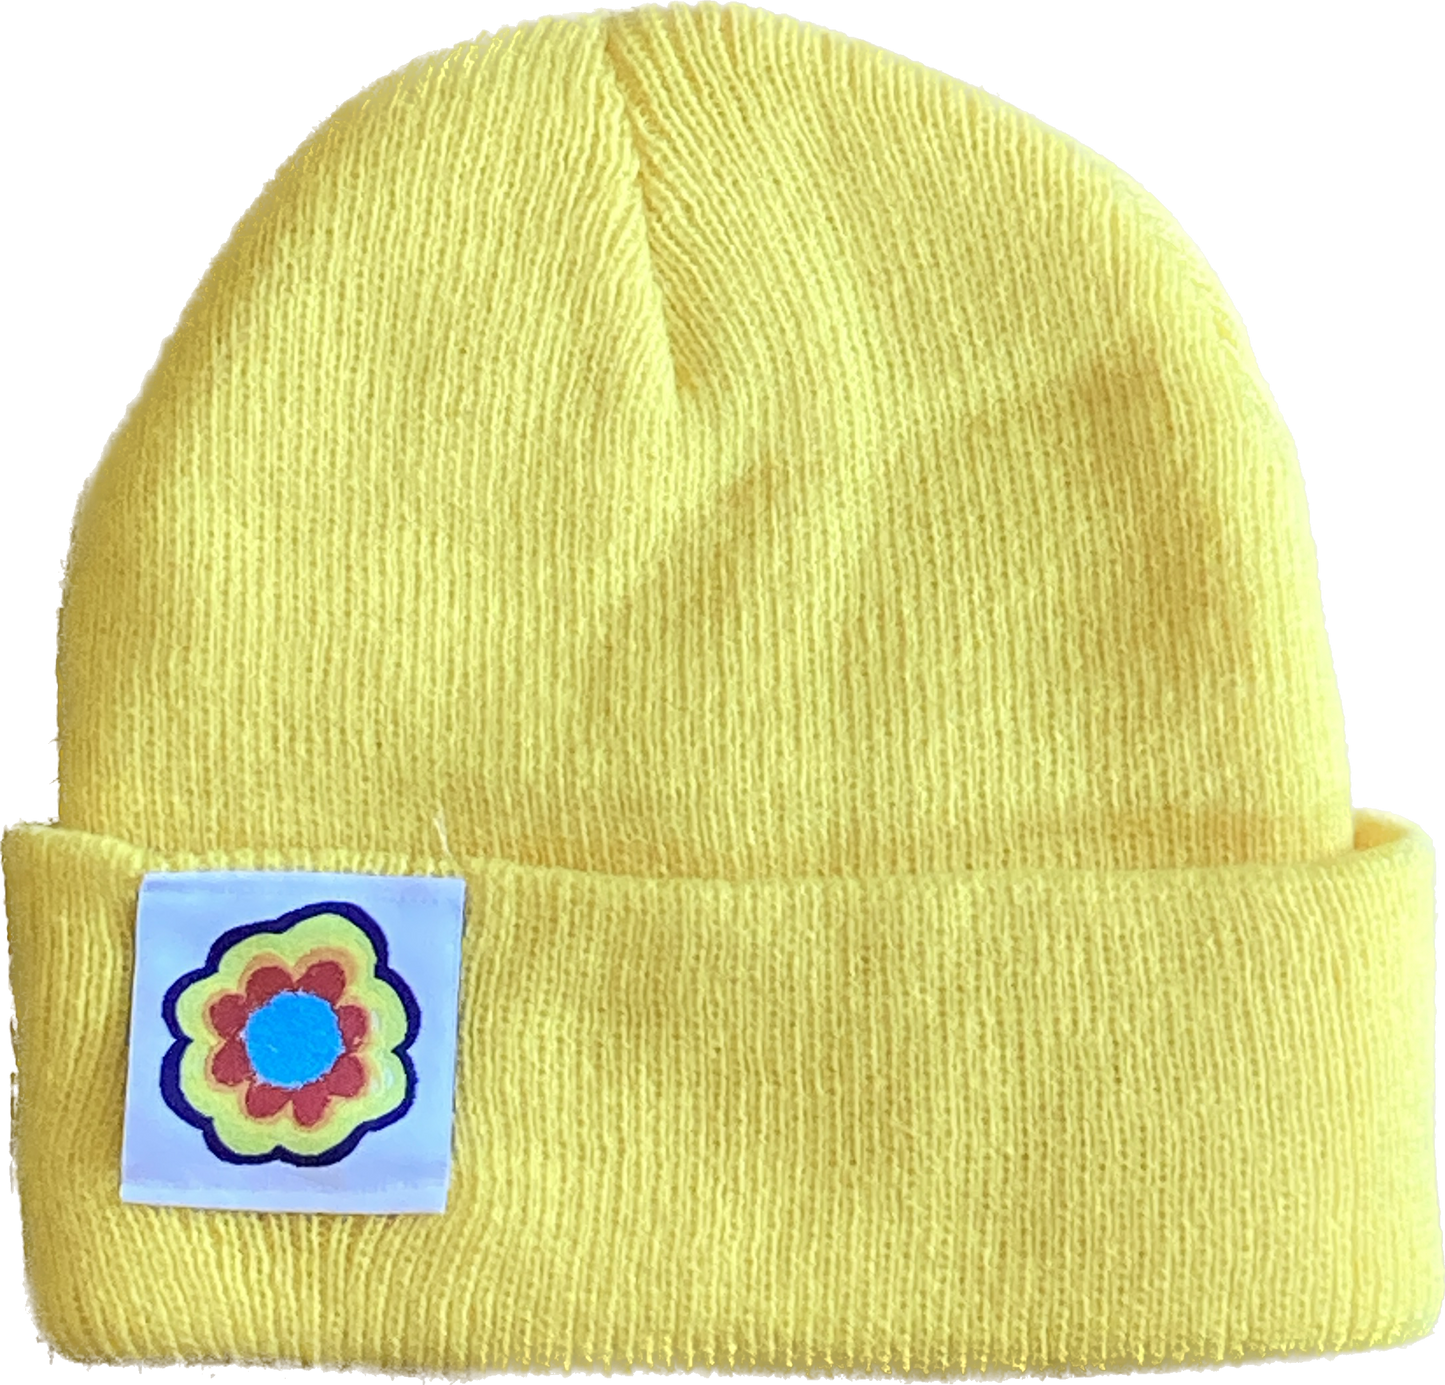 PlayBoy Play-Doh Crossover Beanie